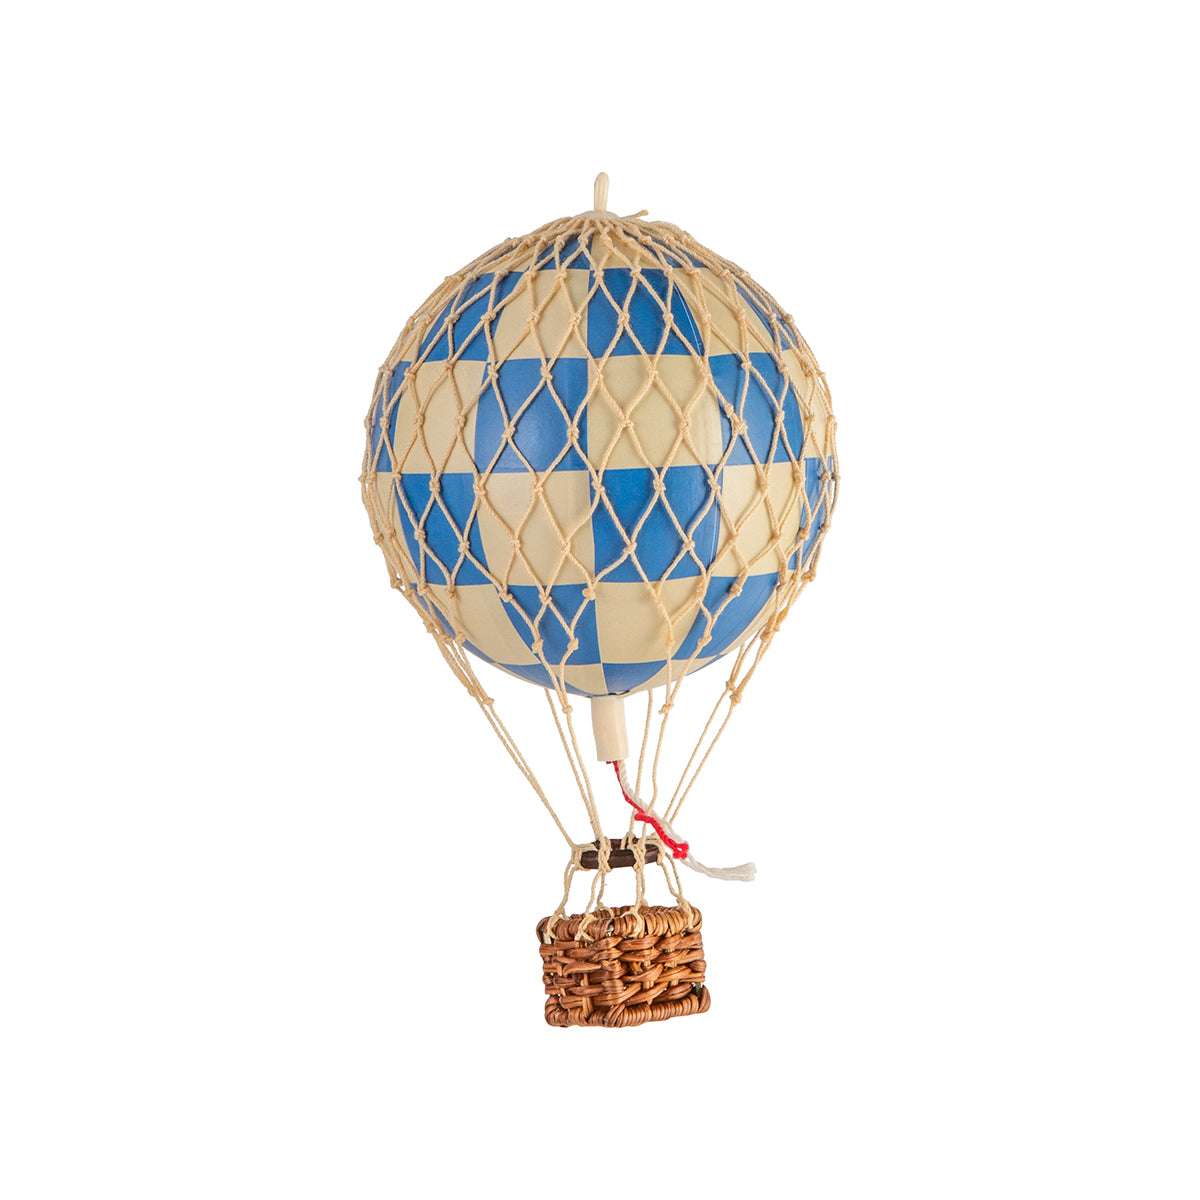 A Wonderen Extra Small Hot Air Balloon - Floating The Skies on a white background.